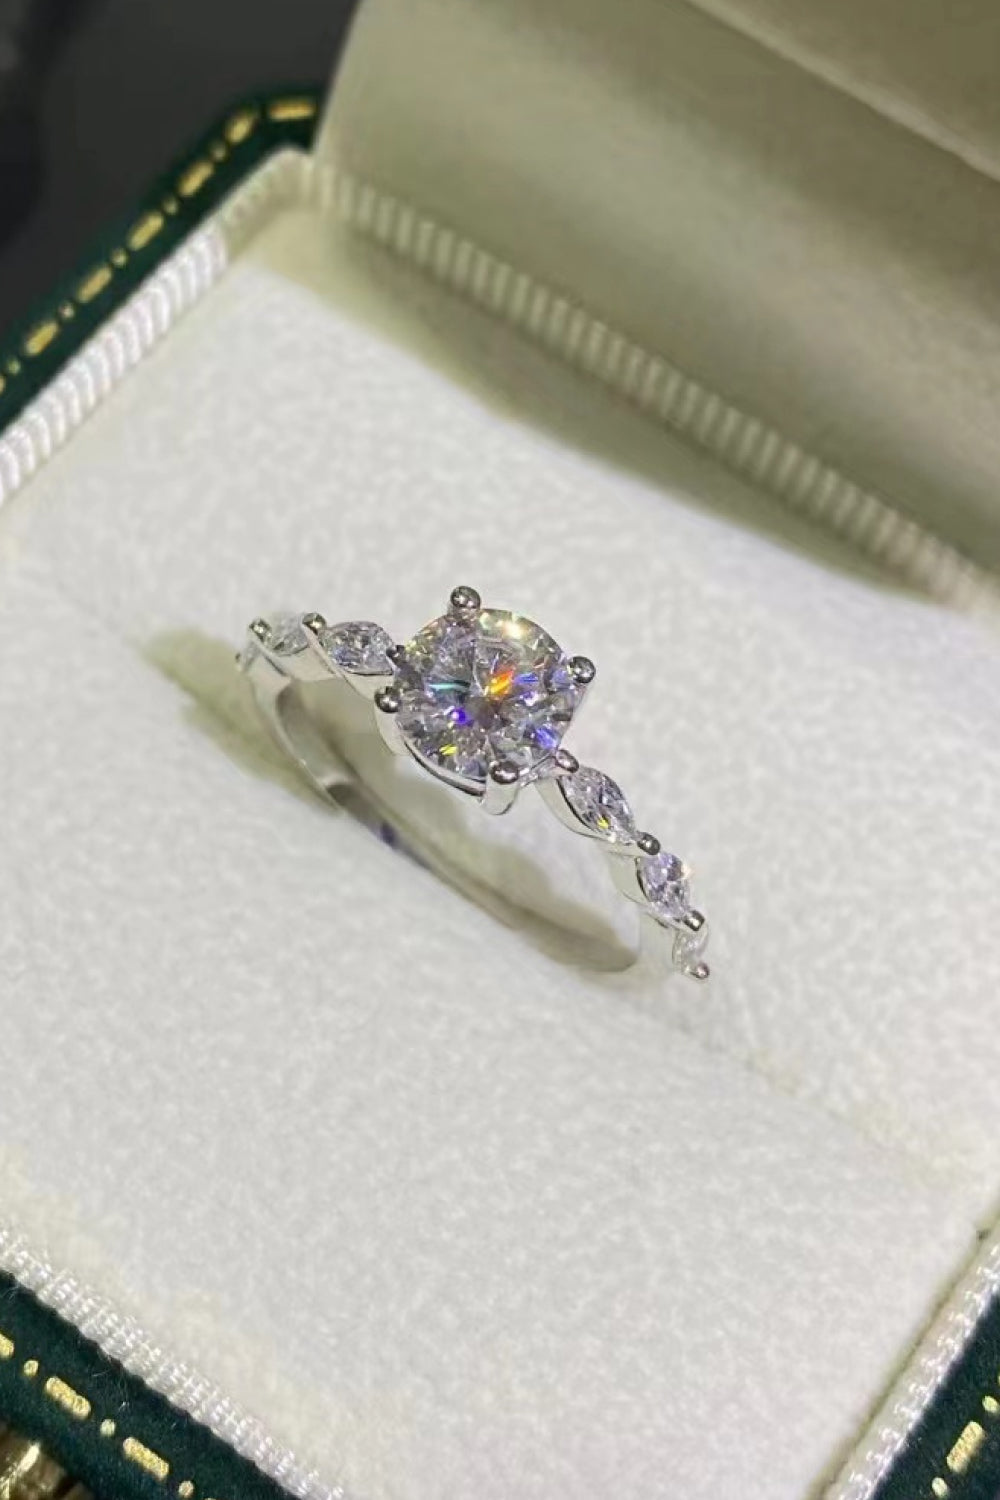 Now I See 1 Carat Moissanite Ring - Rings - FITGGINS